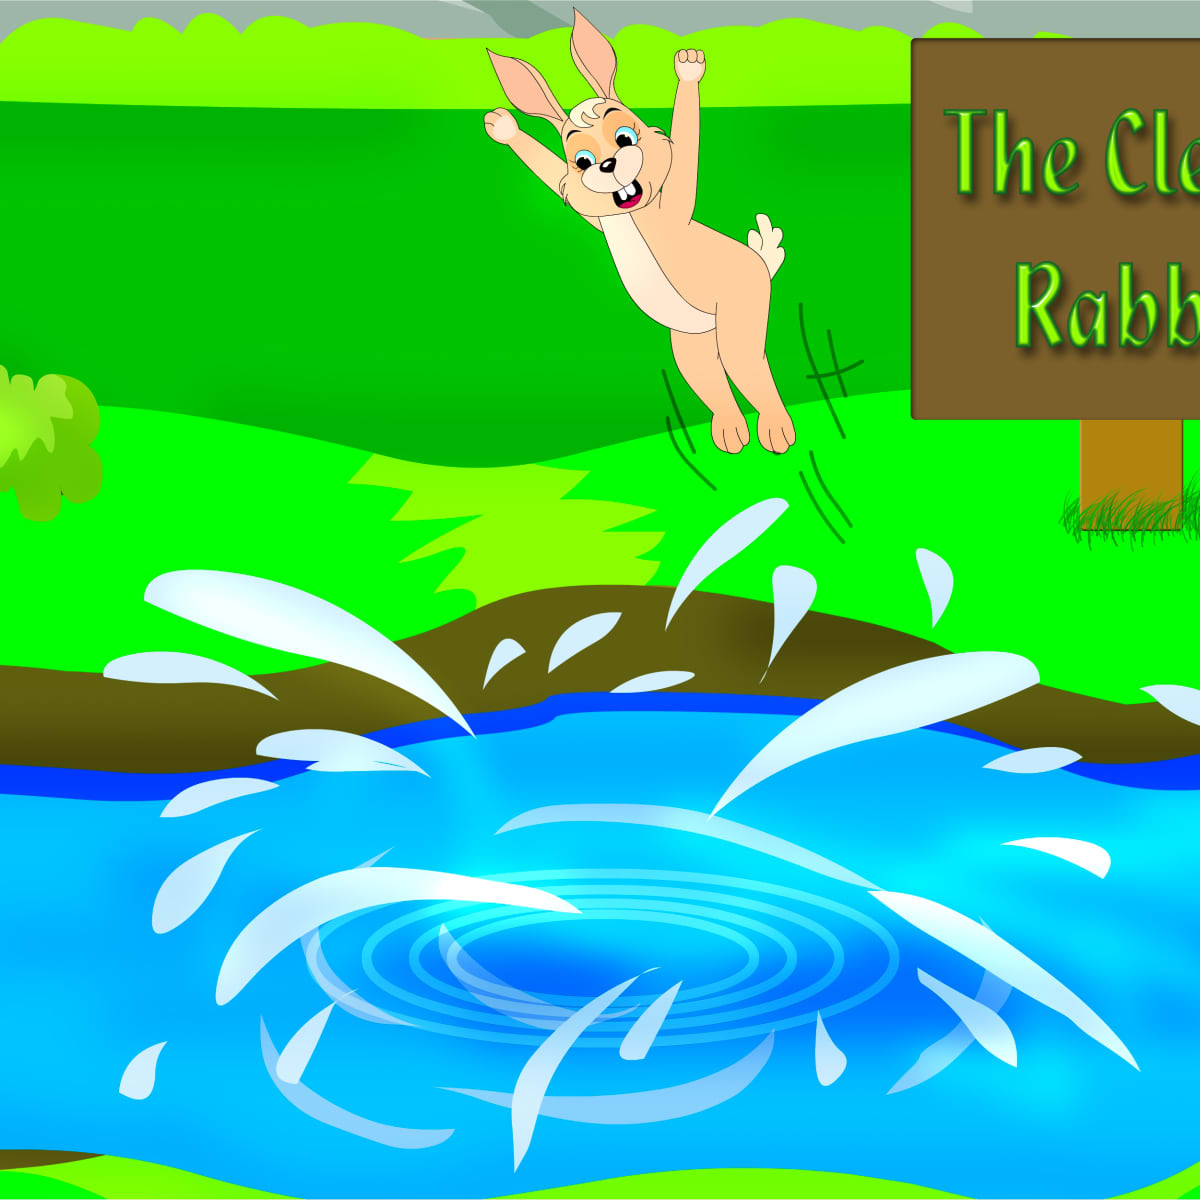 Moral Short Stories With Pictures: Clever Rabbit & Foolish Lion - HubPages